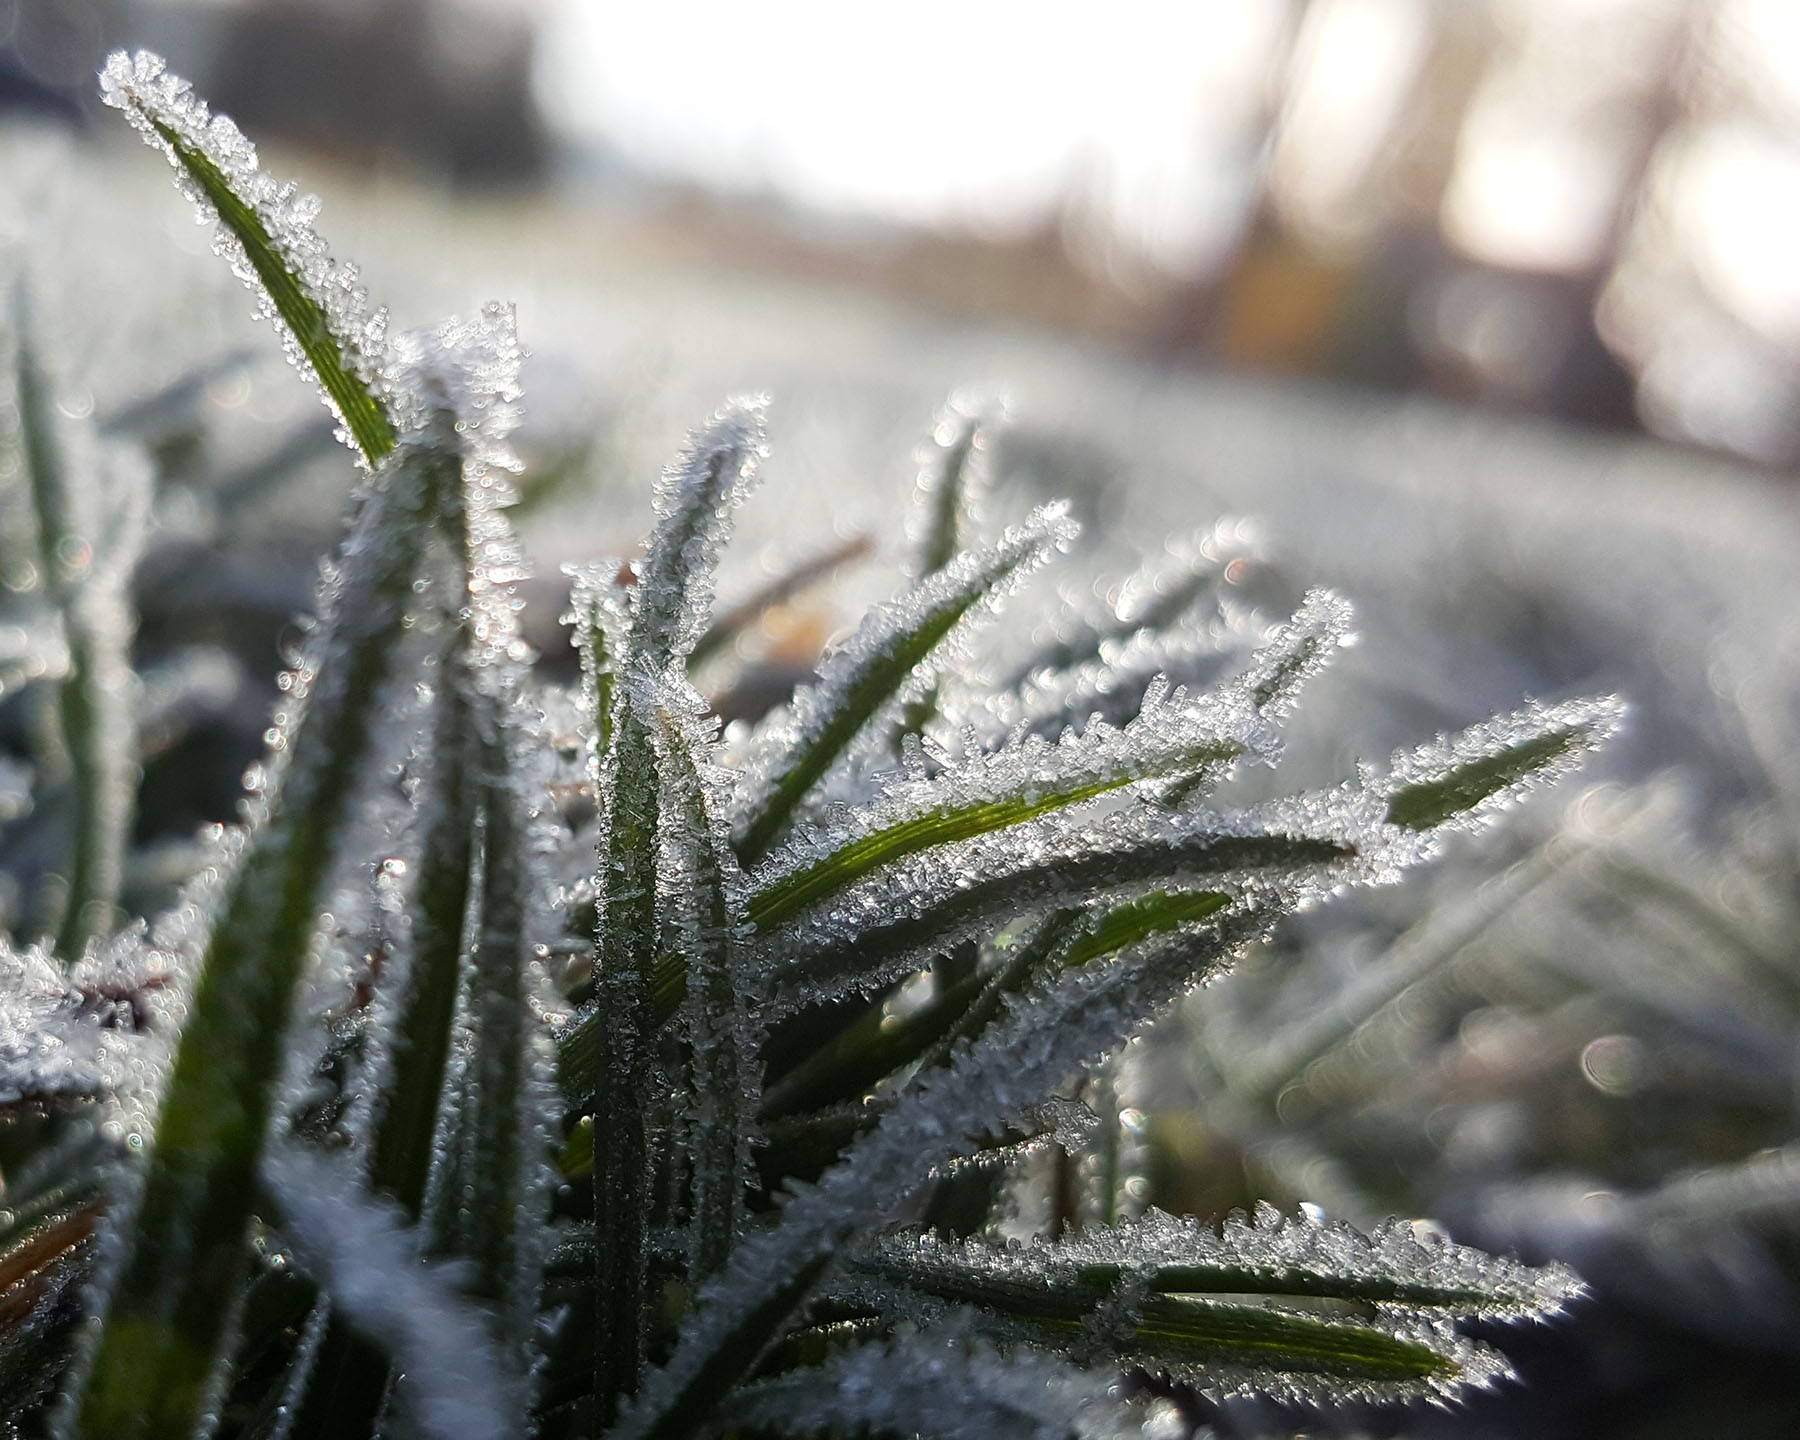 Grass with frost on